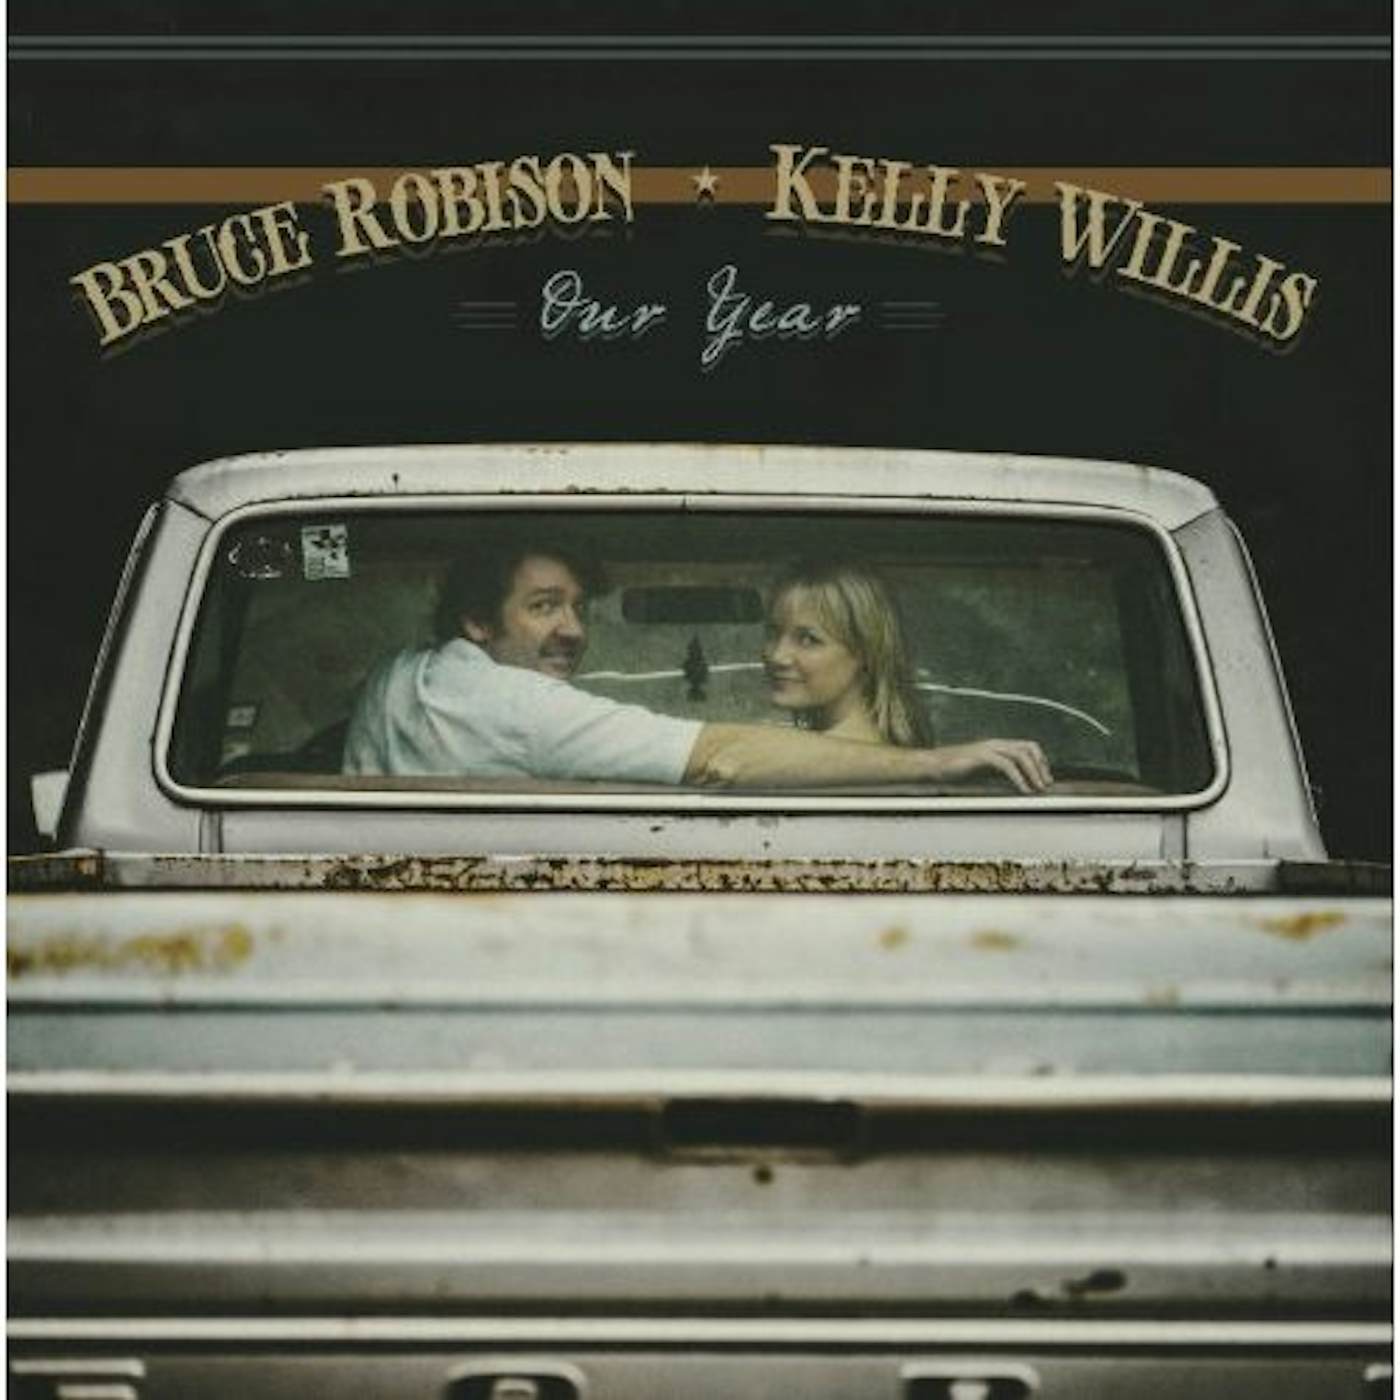 Kelly Willis & Bruce Robison OUR YEAR CD